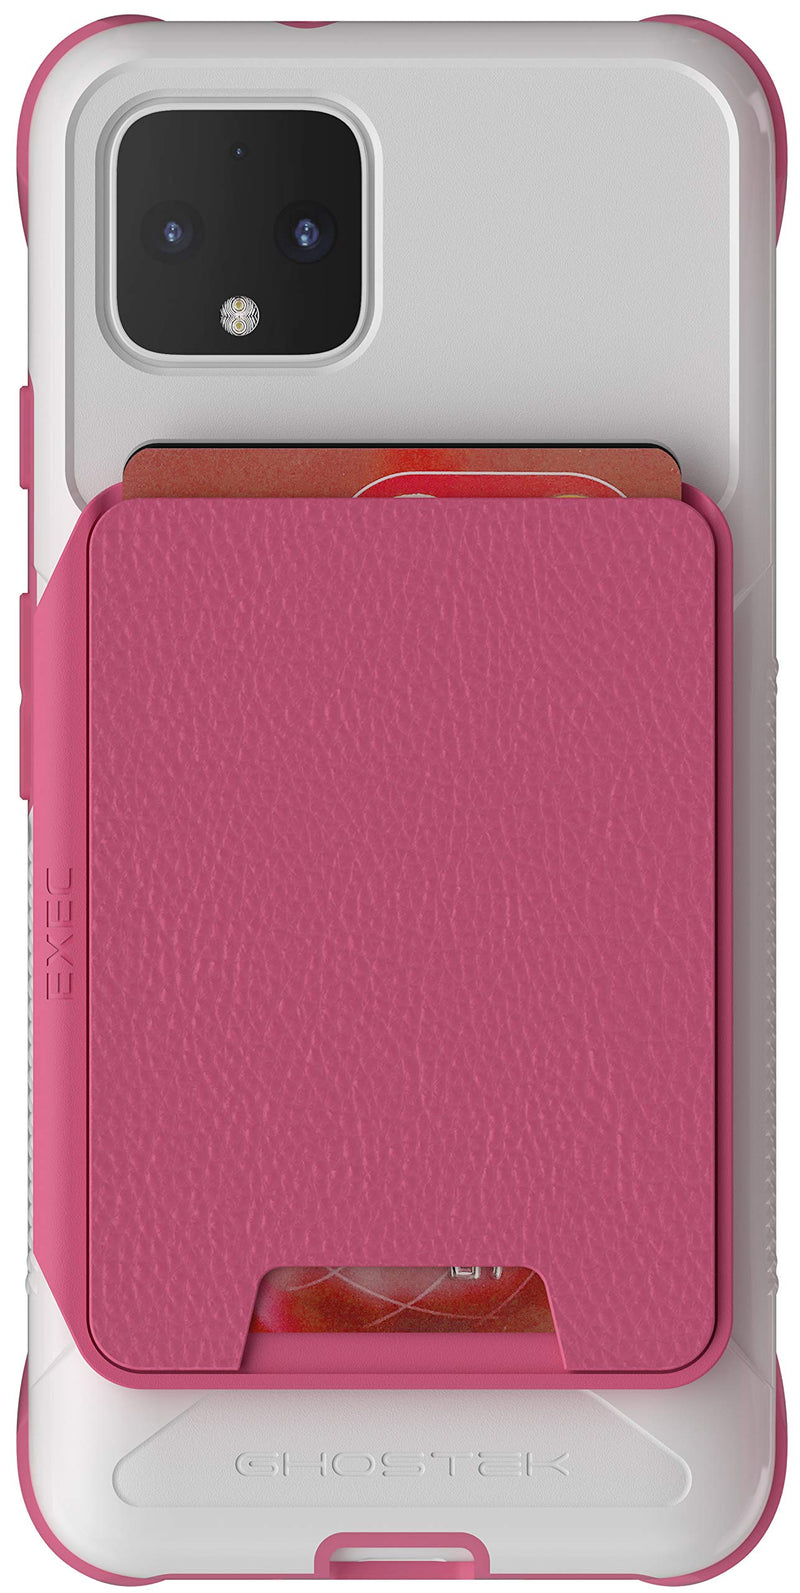 Ghostek Exec Magnetic Wallet Pixel 4 Case with Detach Slide-Out Leather Card Holder Built-in Magnet is Perfect for Car Mounts and Removable for Wireless Charging 2019 Google Pixel 4 (5.7 Inch) - Pink